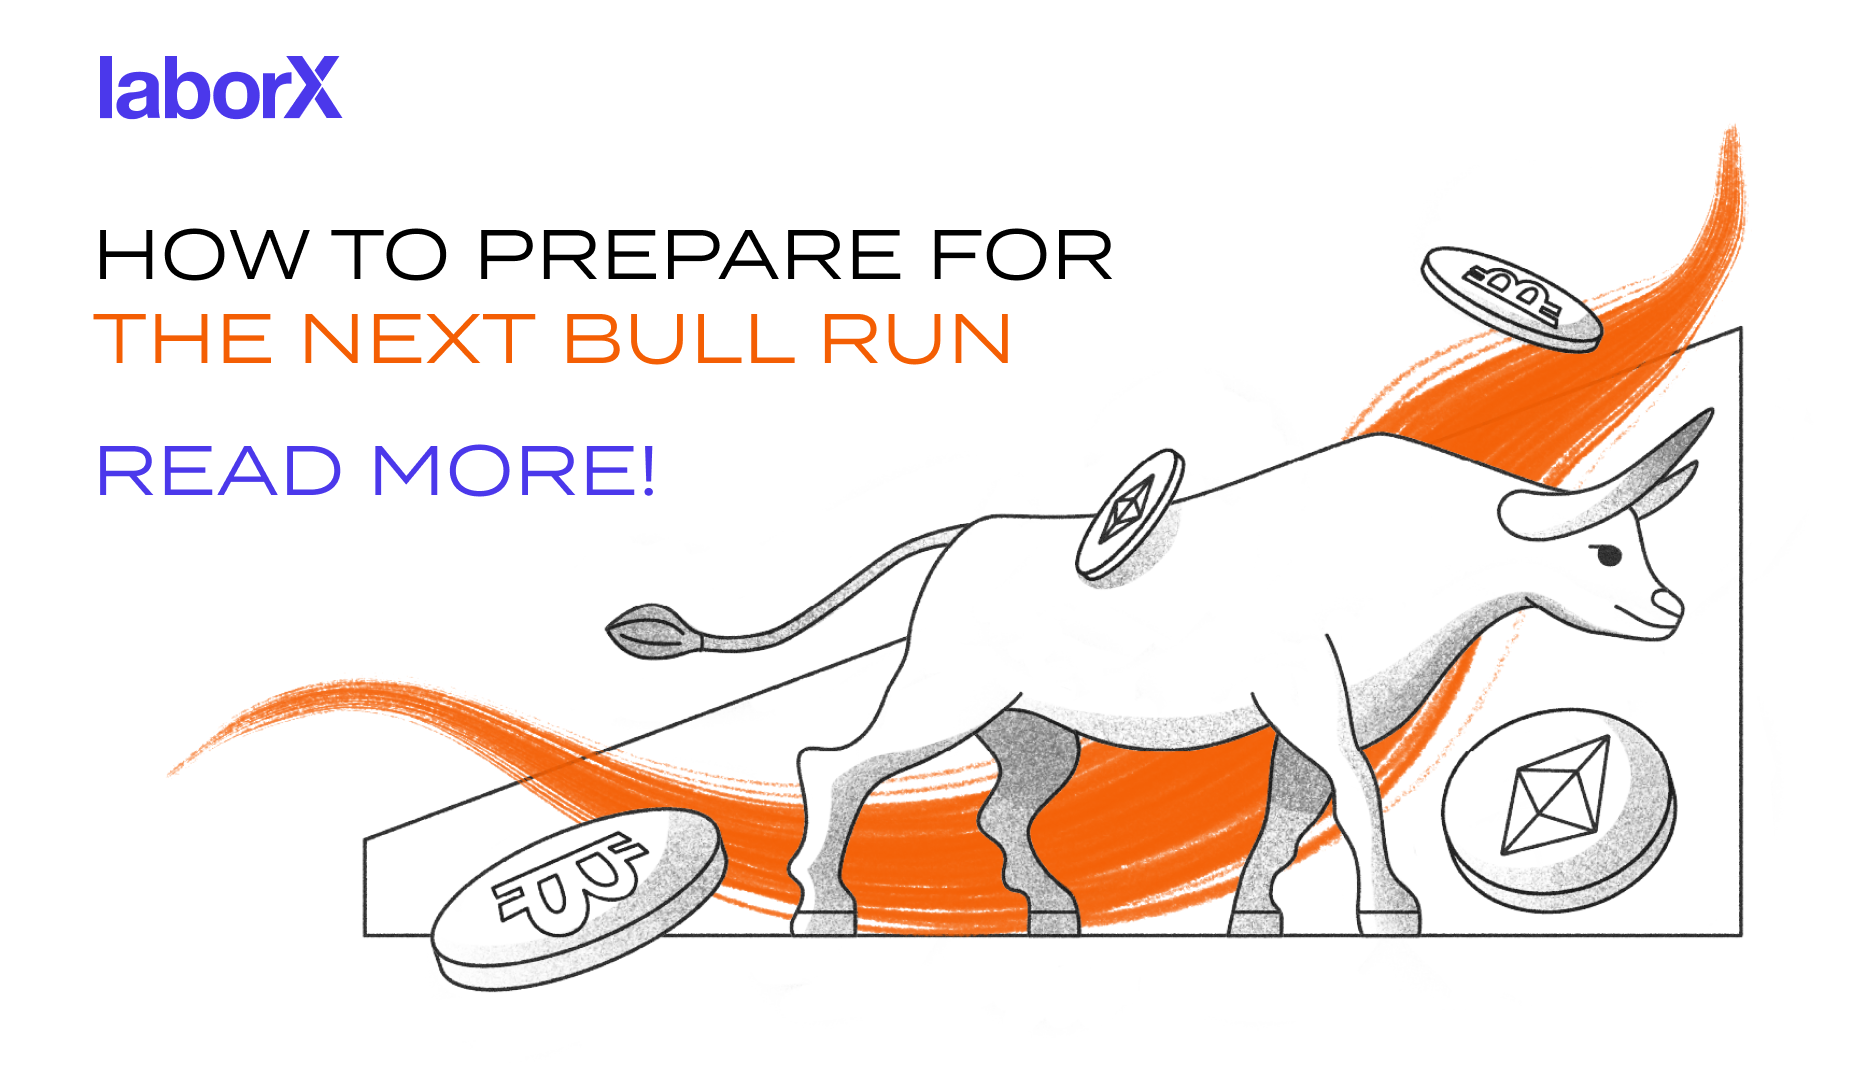 How To Prepare For The Next Bull Run